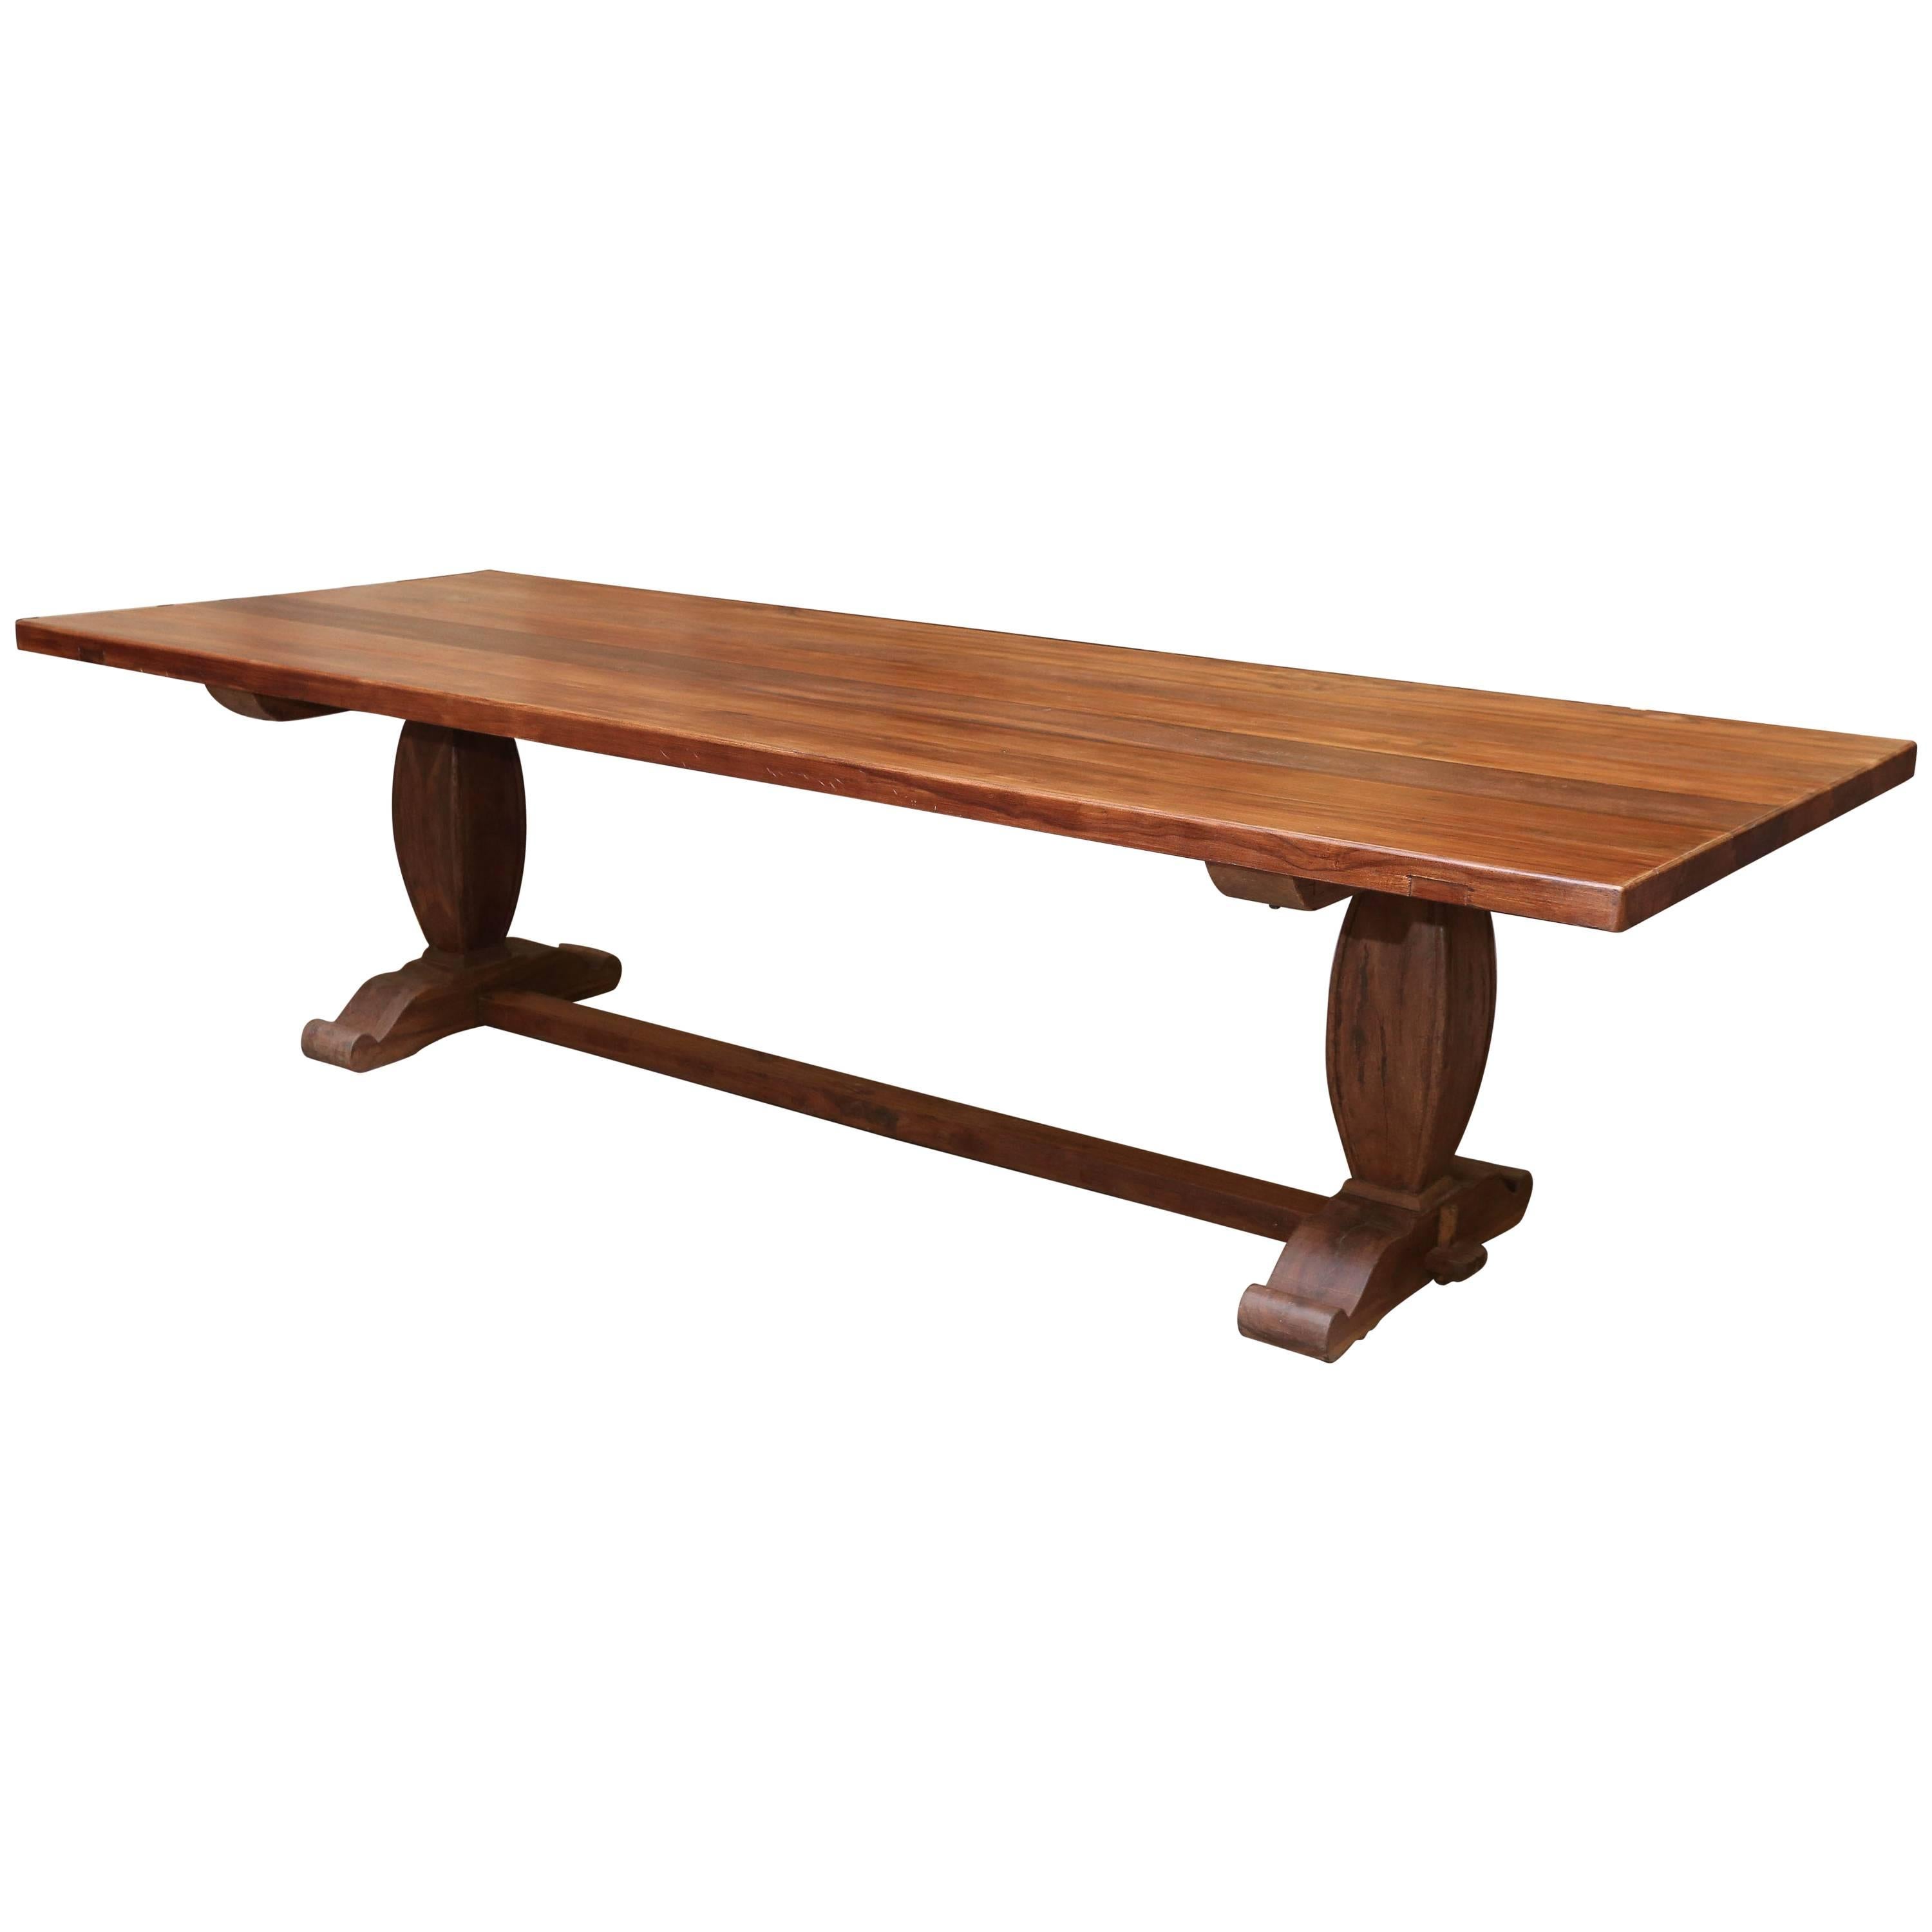 Thick Solid Teak Wood Top Early 20th Century Elegant Plantation Dining Table For Sale